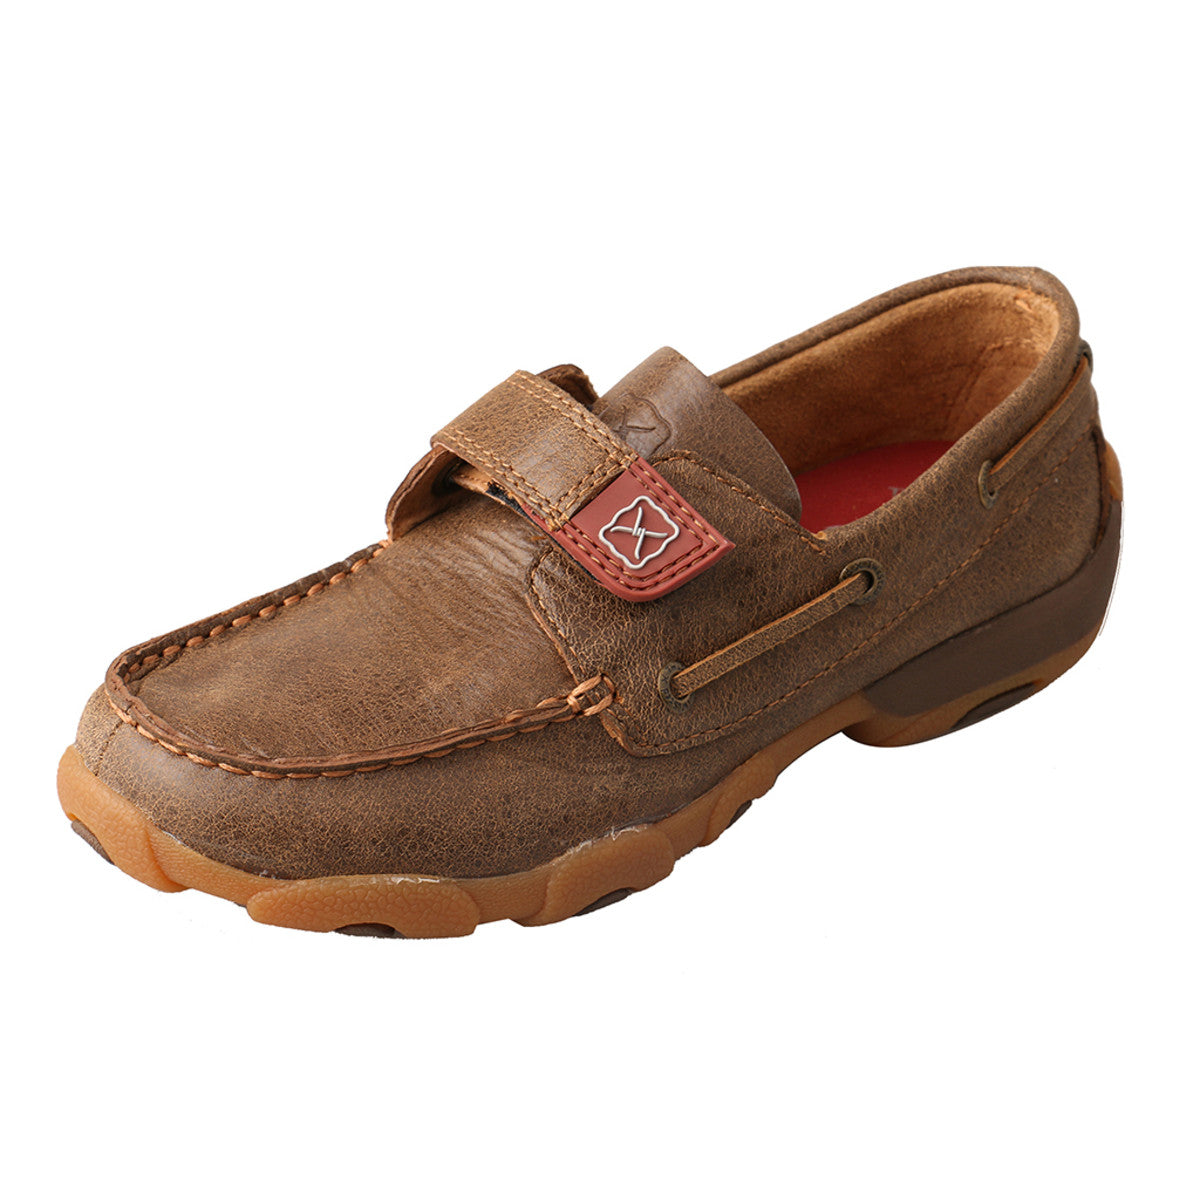 Kids' Twisted X Boat Shoe Driving Moccasins in Bomber from the side view